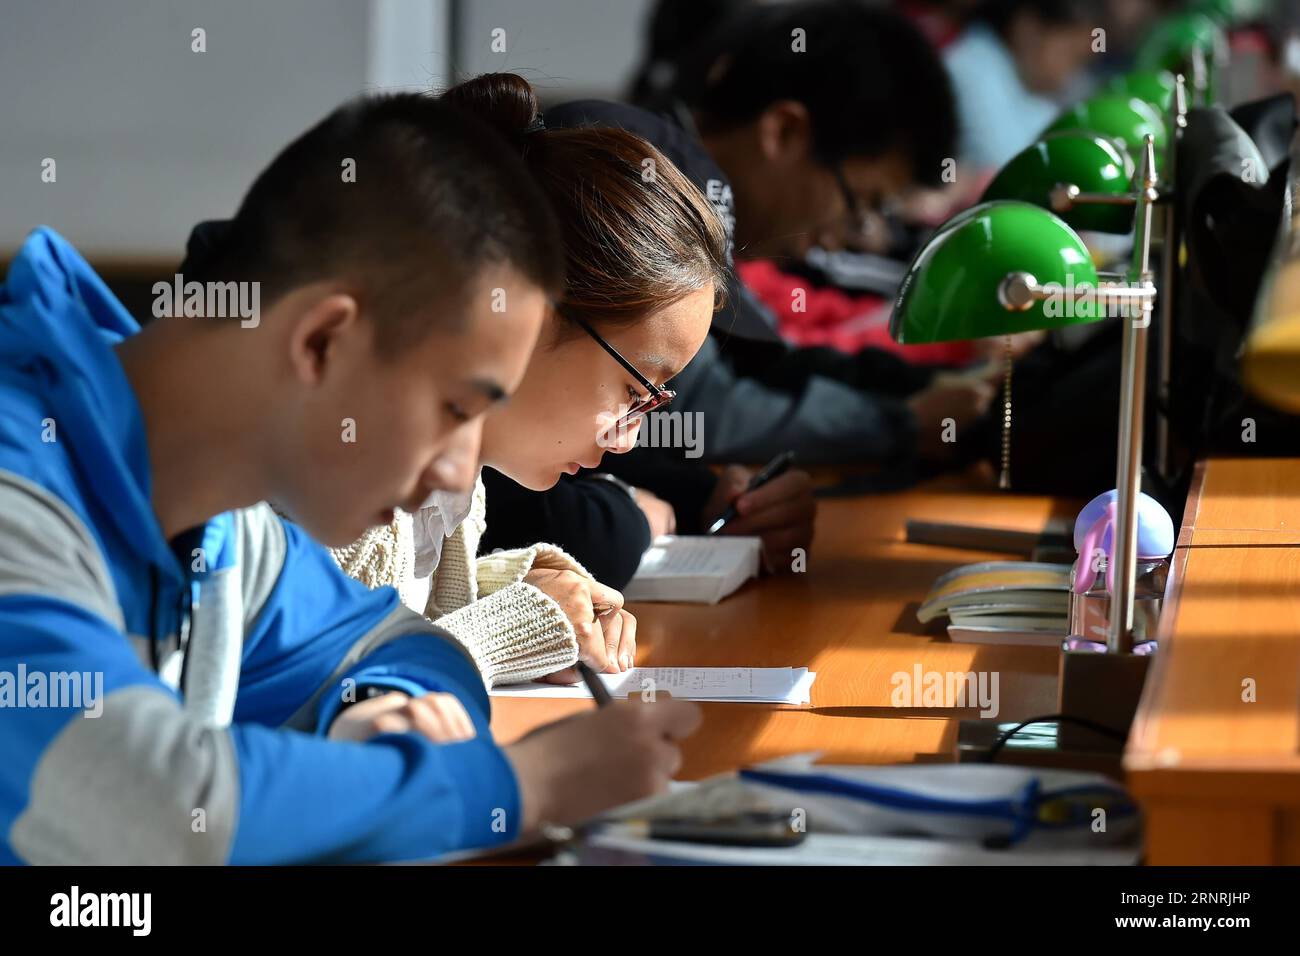 (171004) -- TAIYUAN, Oct. 4, 2017 -- Citizens read books at a library during the holiday for the National Day and the Mid-Autumn Festival in Taiyuan, north China s Shanxi Province, Oct. 4, 2017. This year s Mid-Autumn Festival falls on Oct. 4. Mid-Autumn Festival, the 15th day of the eighth month on China s lunar calendar, is an occasion for family gatherings and well-known as the time to eat mooncakes. )(wsw) CHINA-MID-AUTUMN FESTIVAL-CELEBRATION (CN) CaoxYang PUBLICATIONxNOTxINxCHN Stock Photo